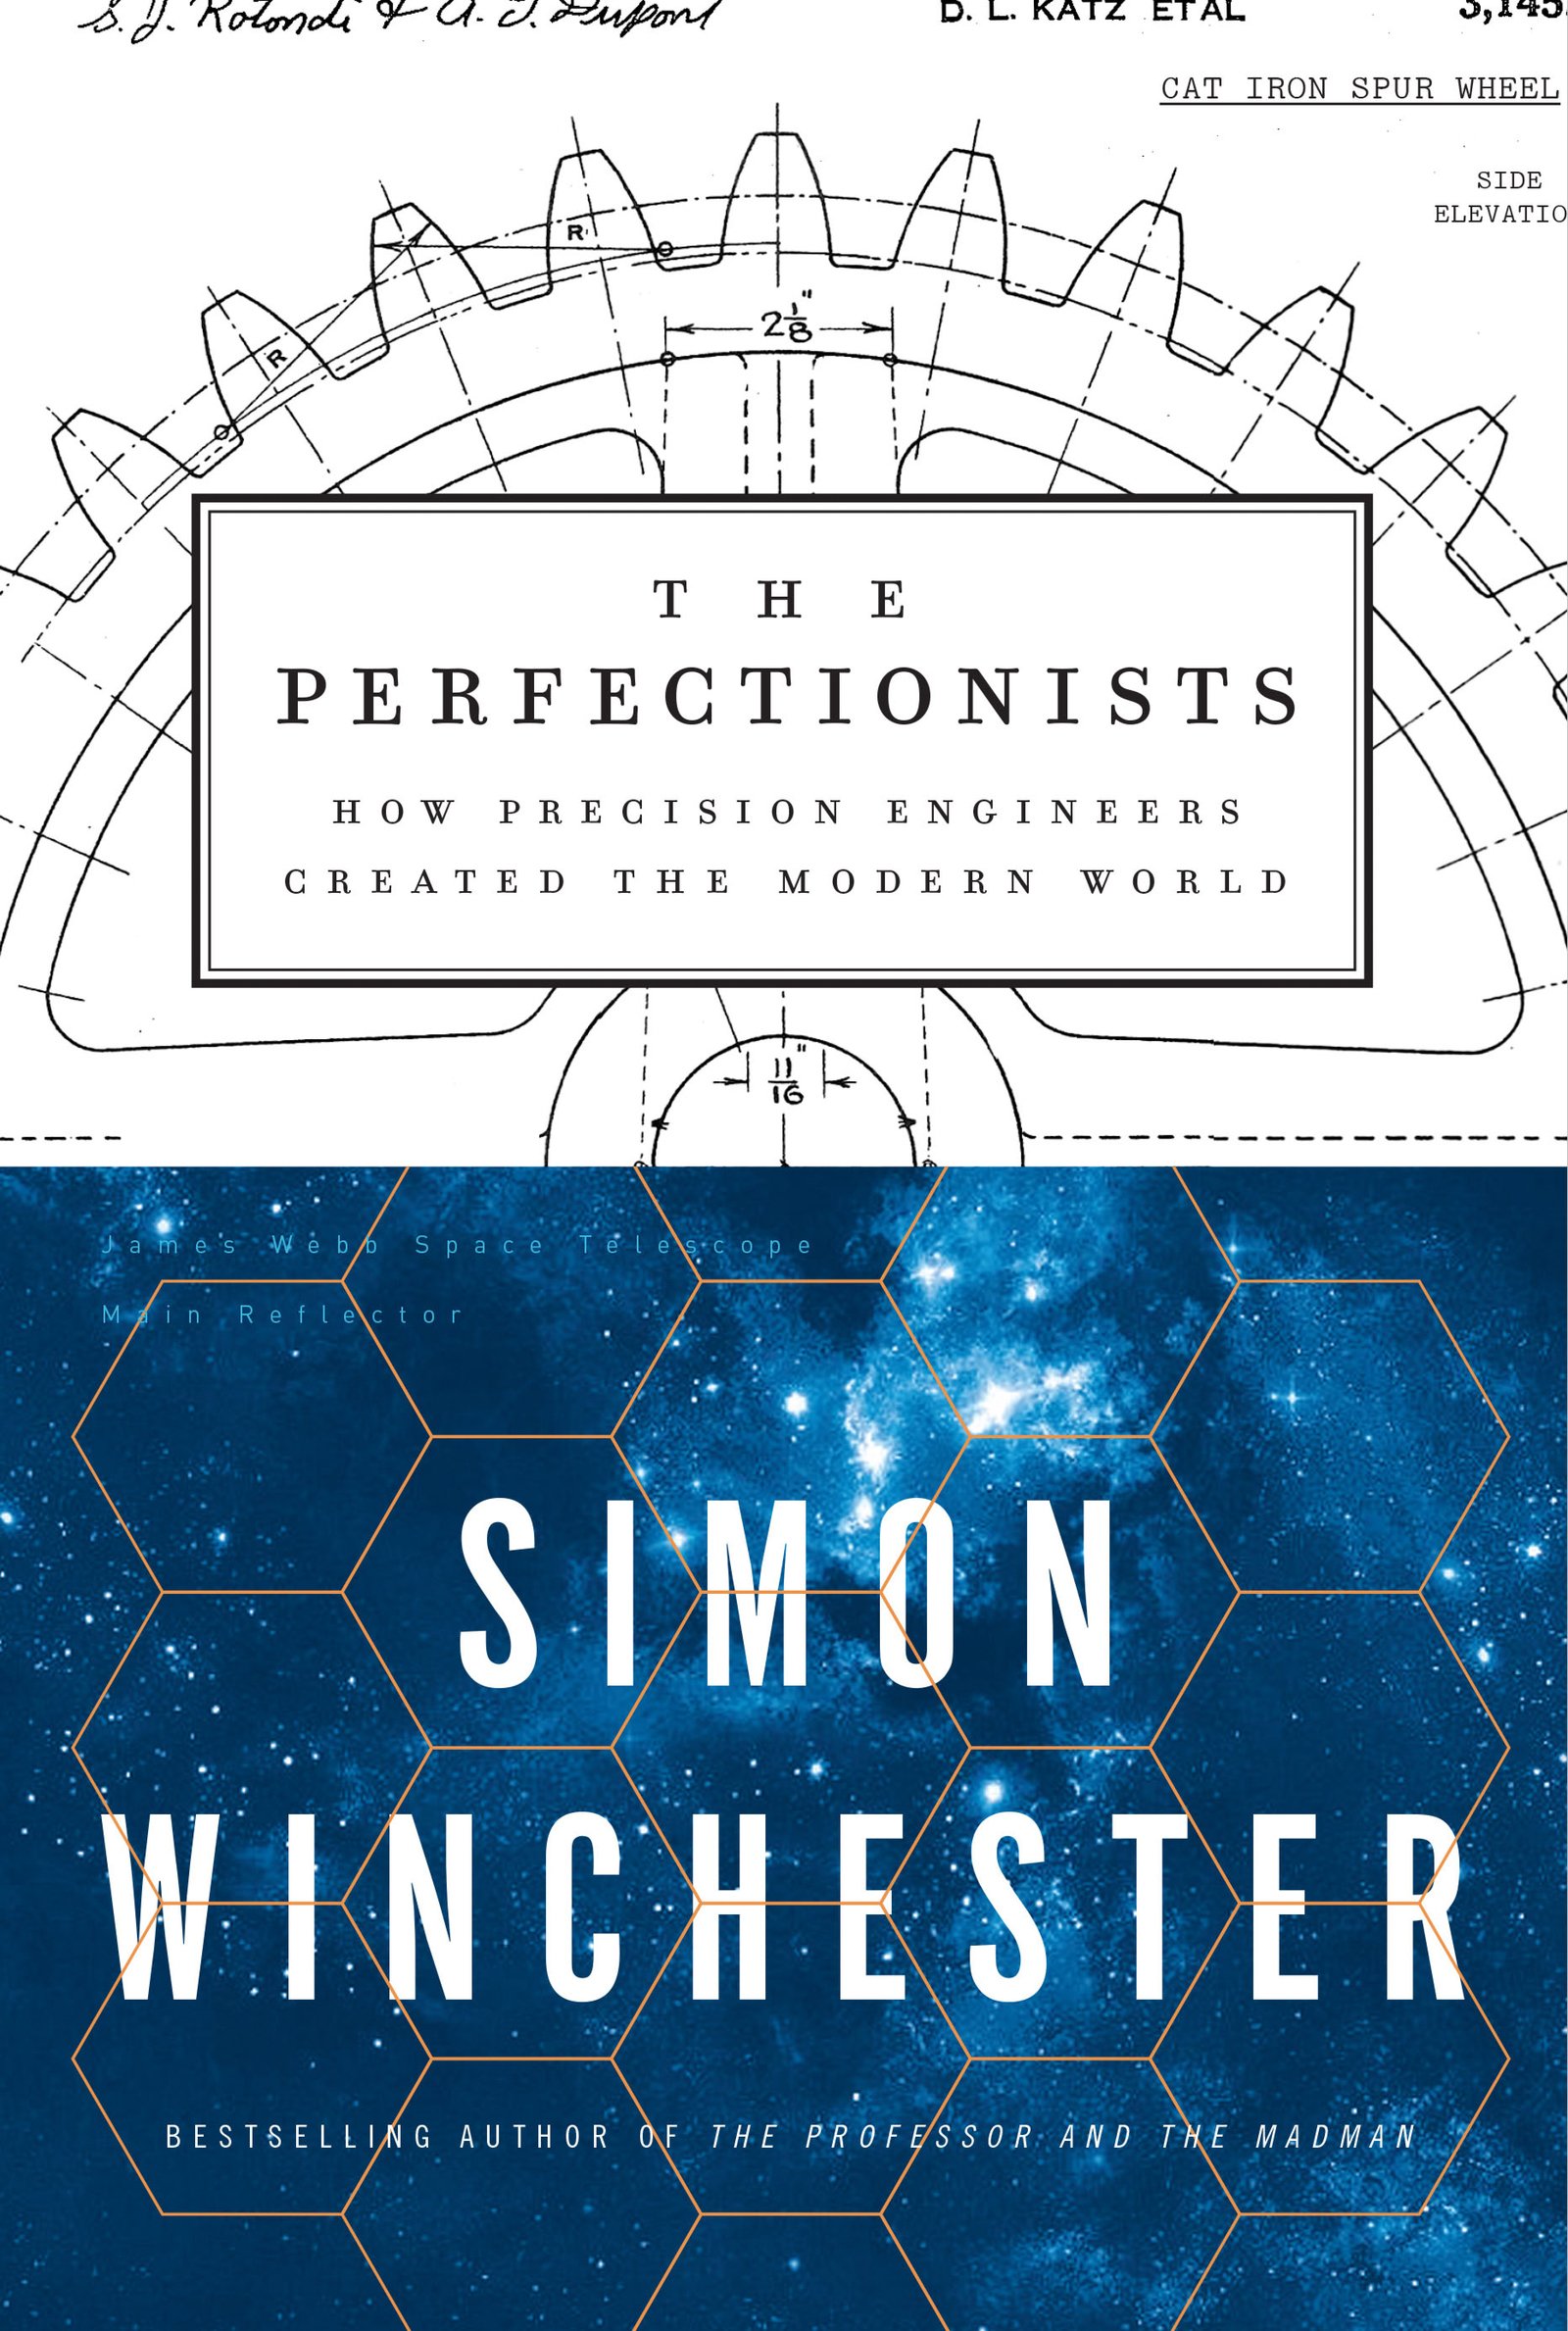 The Perfectionists book cover